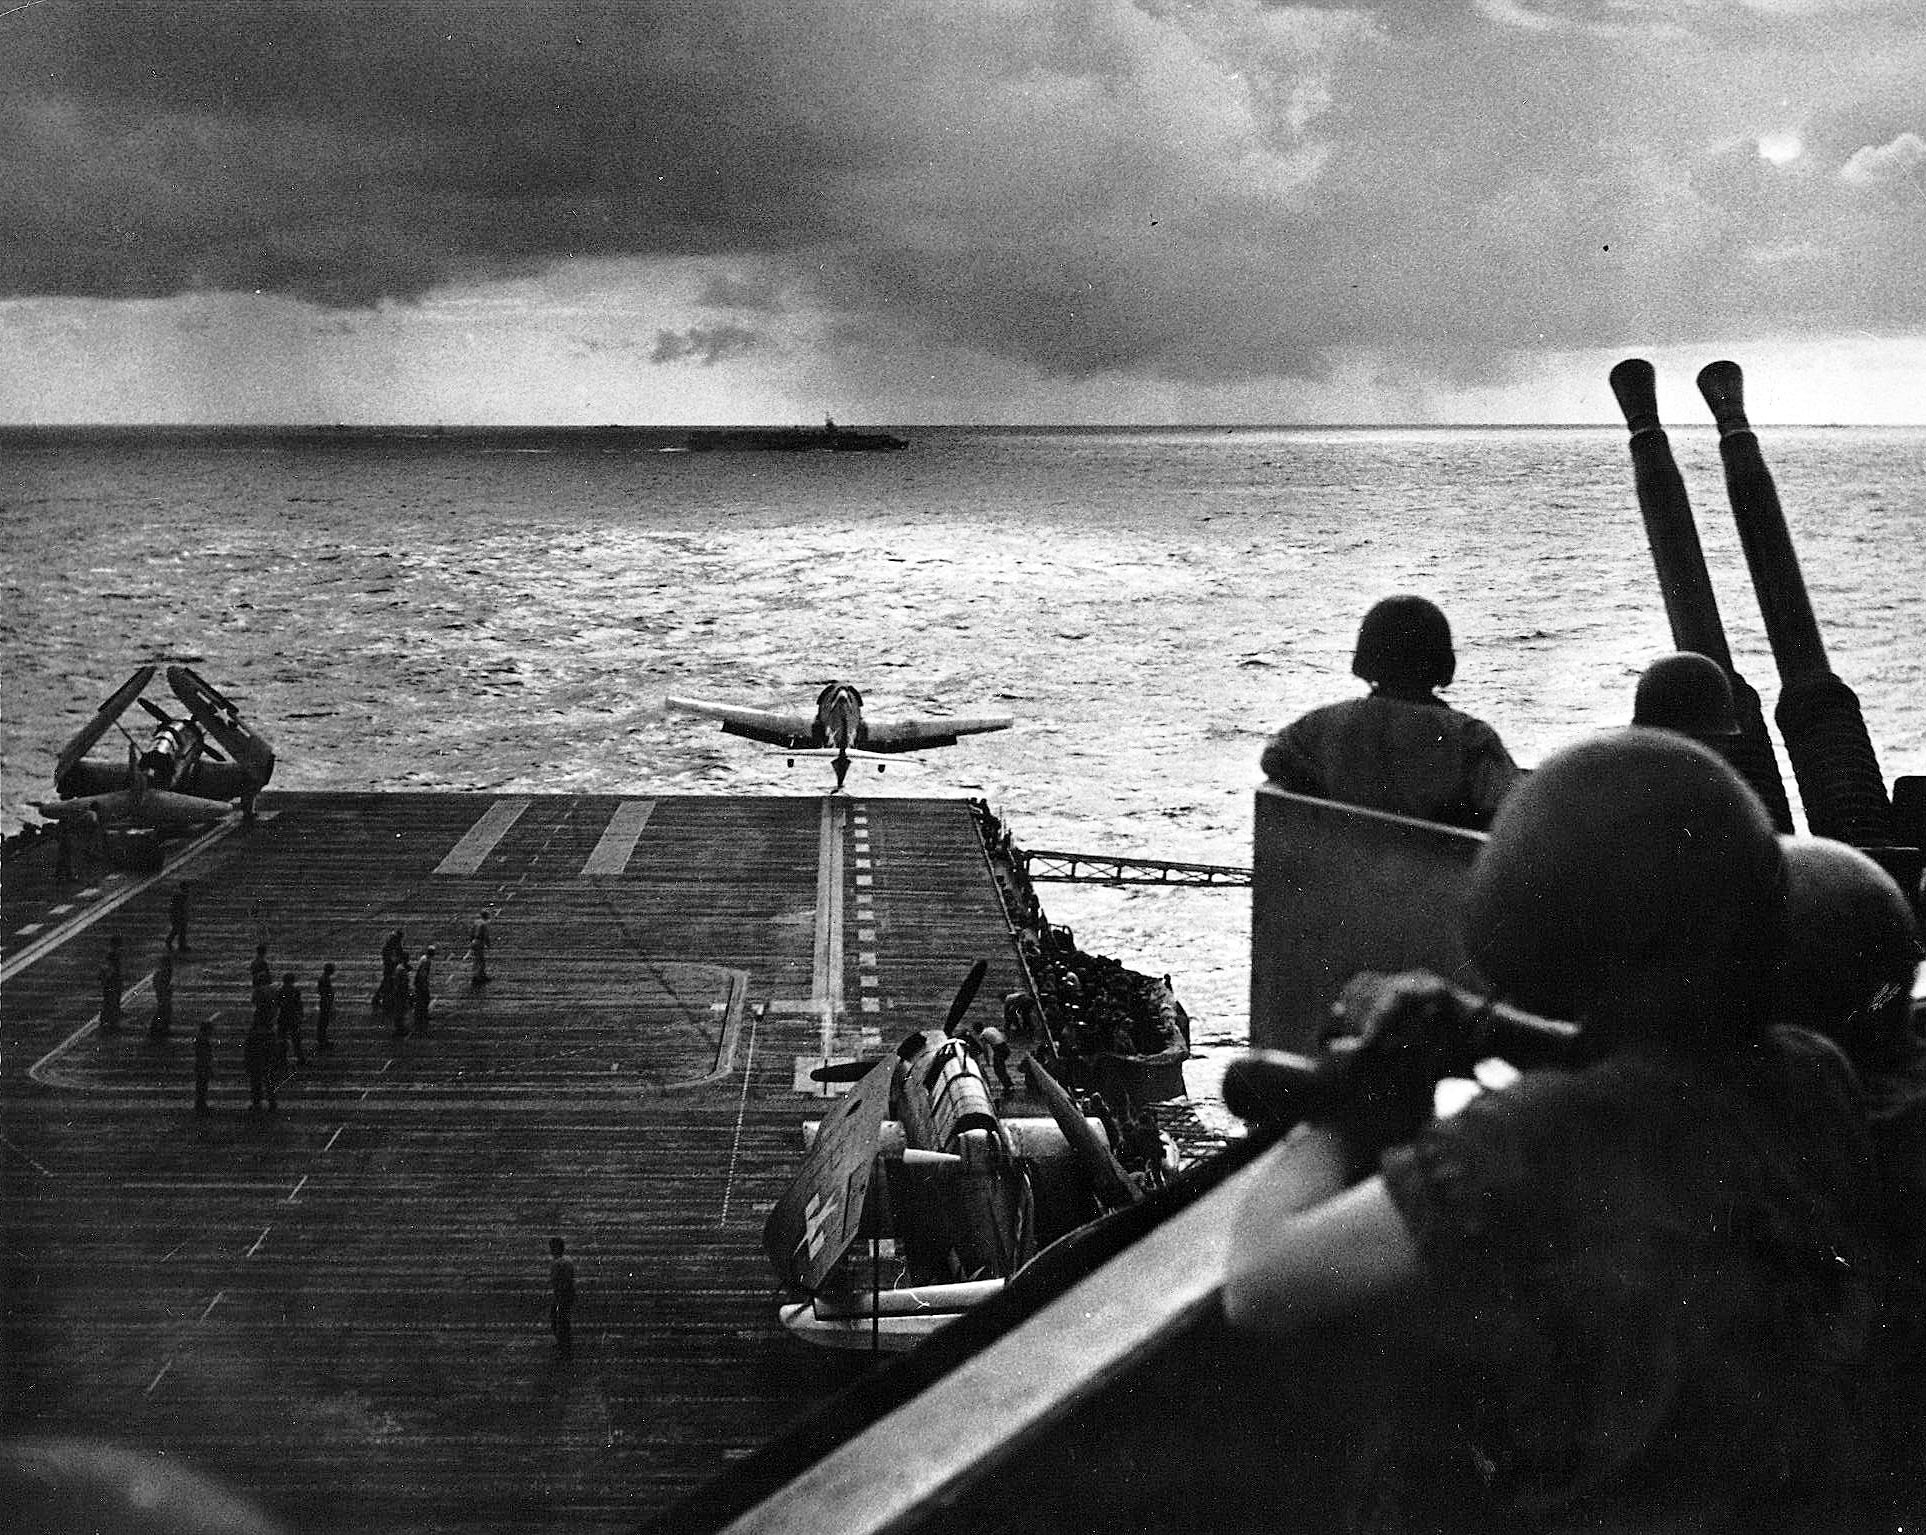 F6F Hellcat launching from USS Intrepid’s starboard catapult, 1945. Note SB2C Helldiver and TBM Avenger spotted on the deck. Note also Independence-class light carrier cutting across Intrepid’s bow.